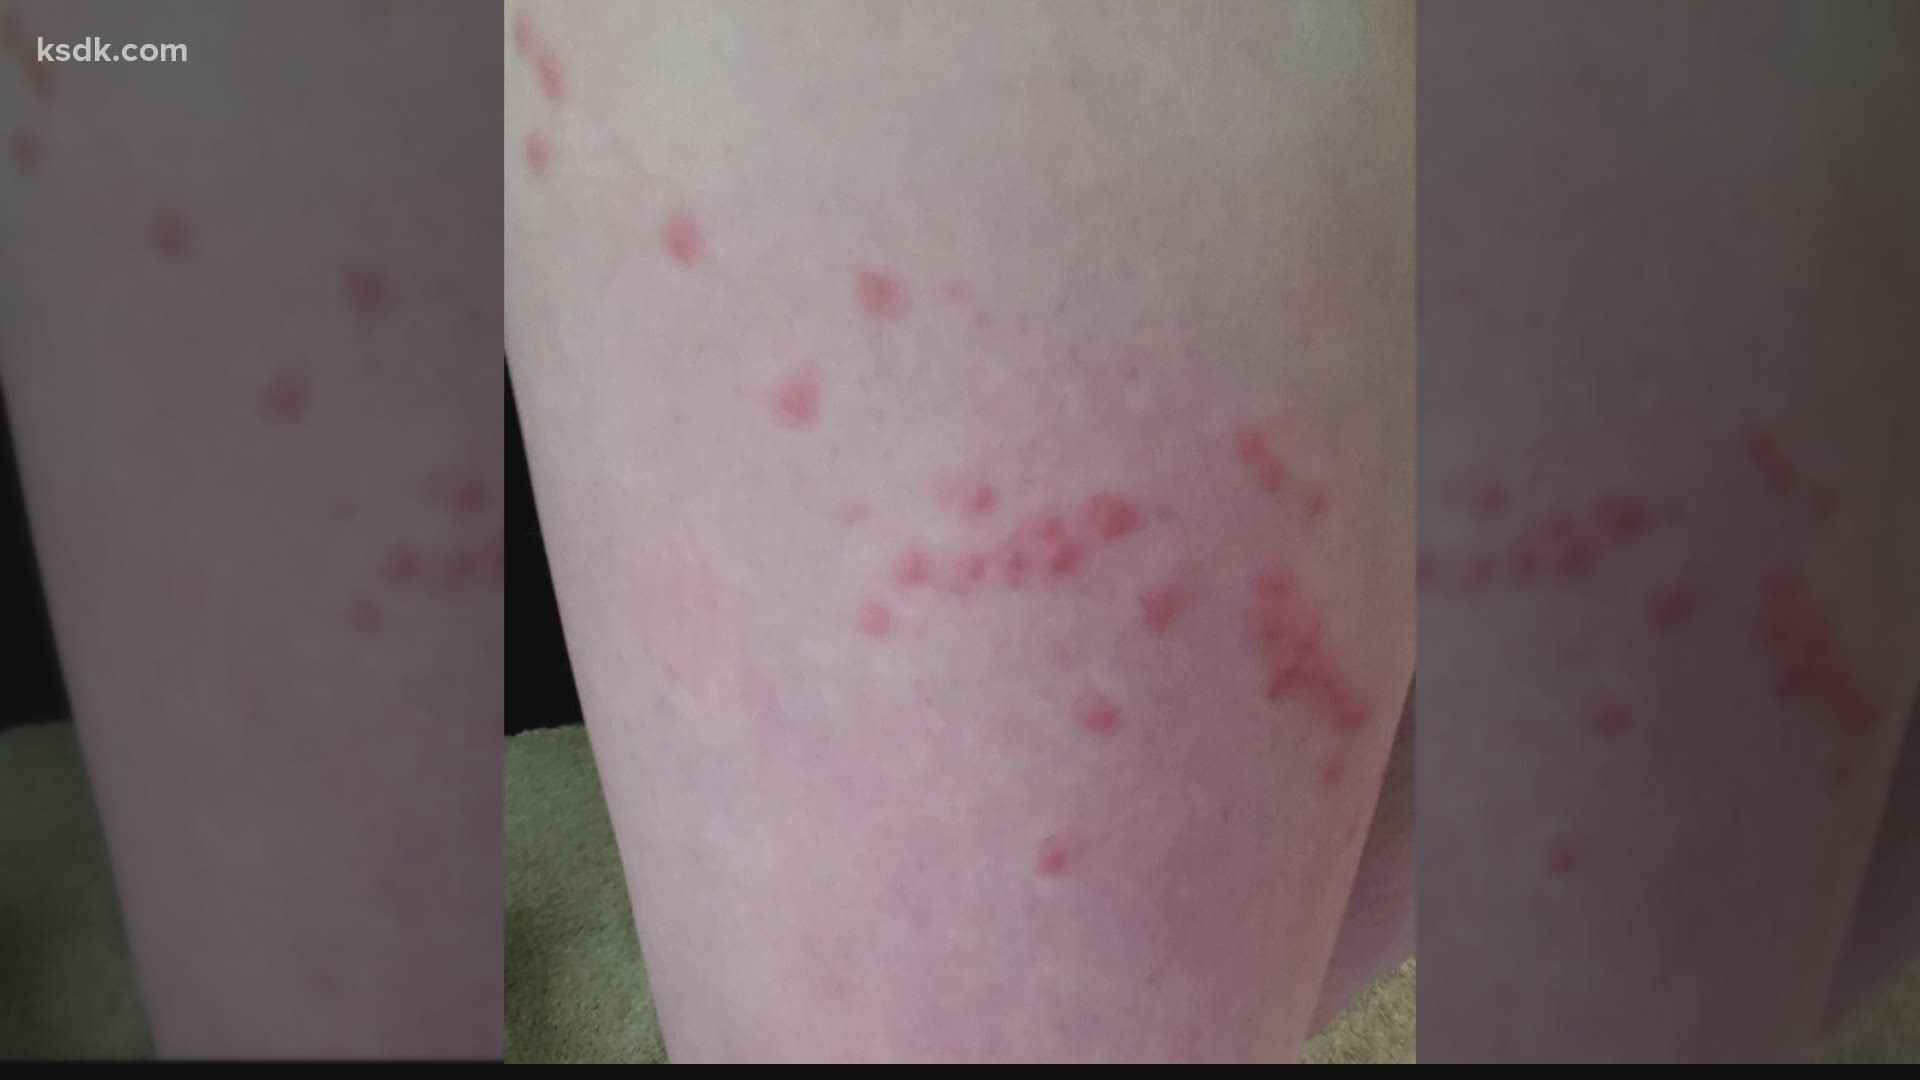 "It's like an overload of mosquitoe bites. It's like mosquito bites on steroids